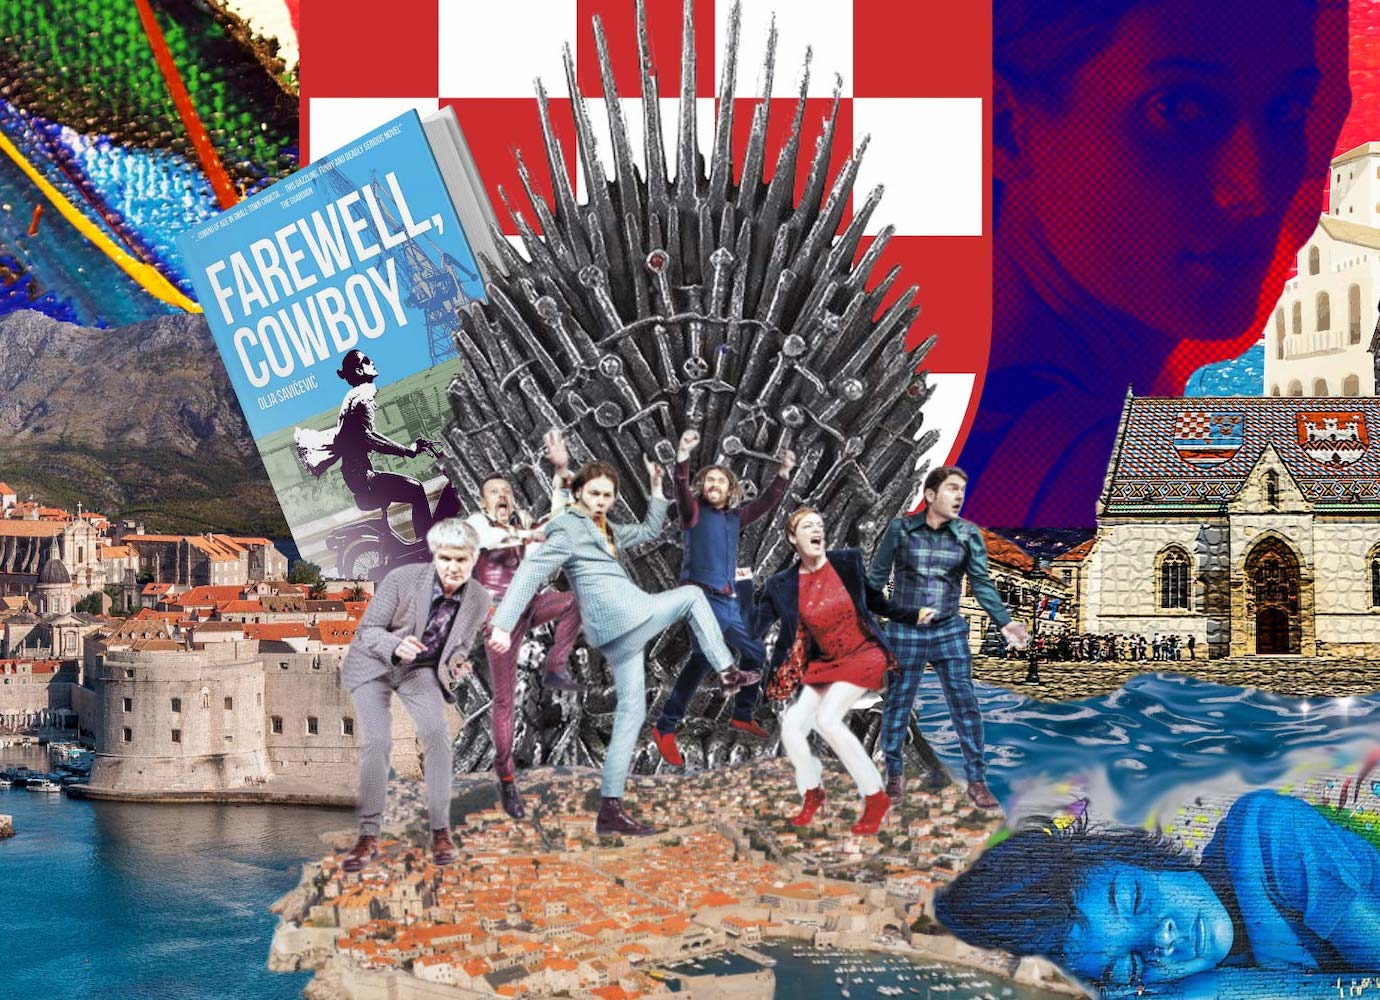 Heading to Croatia? Here are the books, movies, and bands you need in your life to get beyond the tourist trail